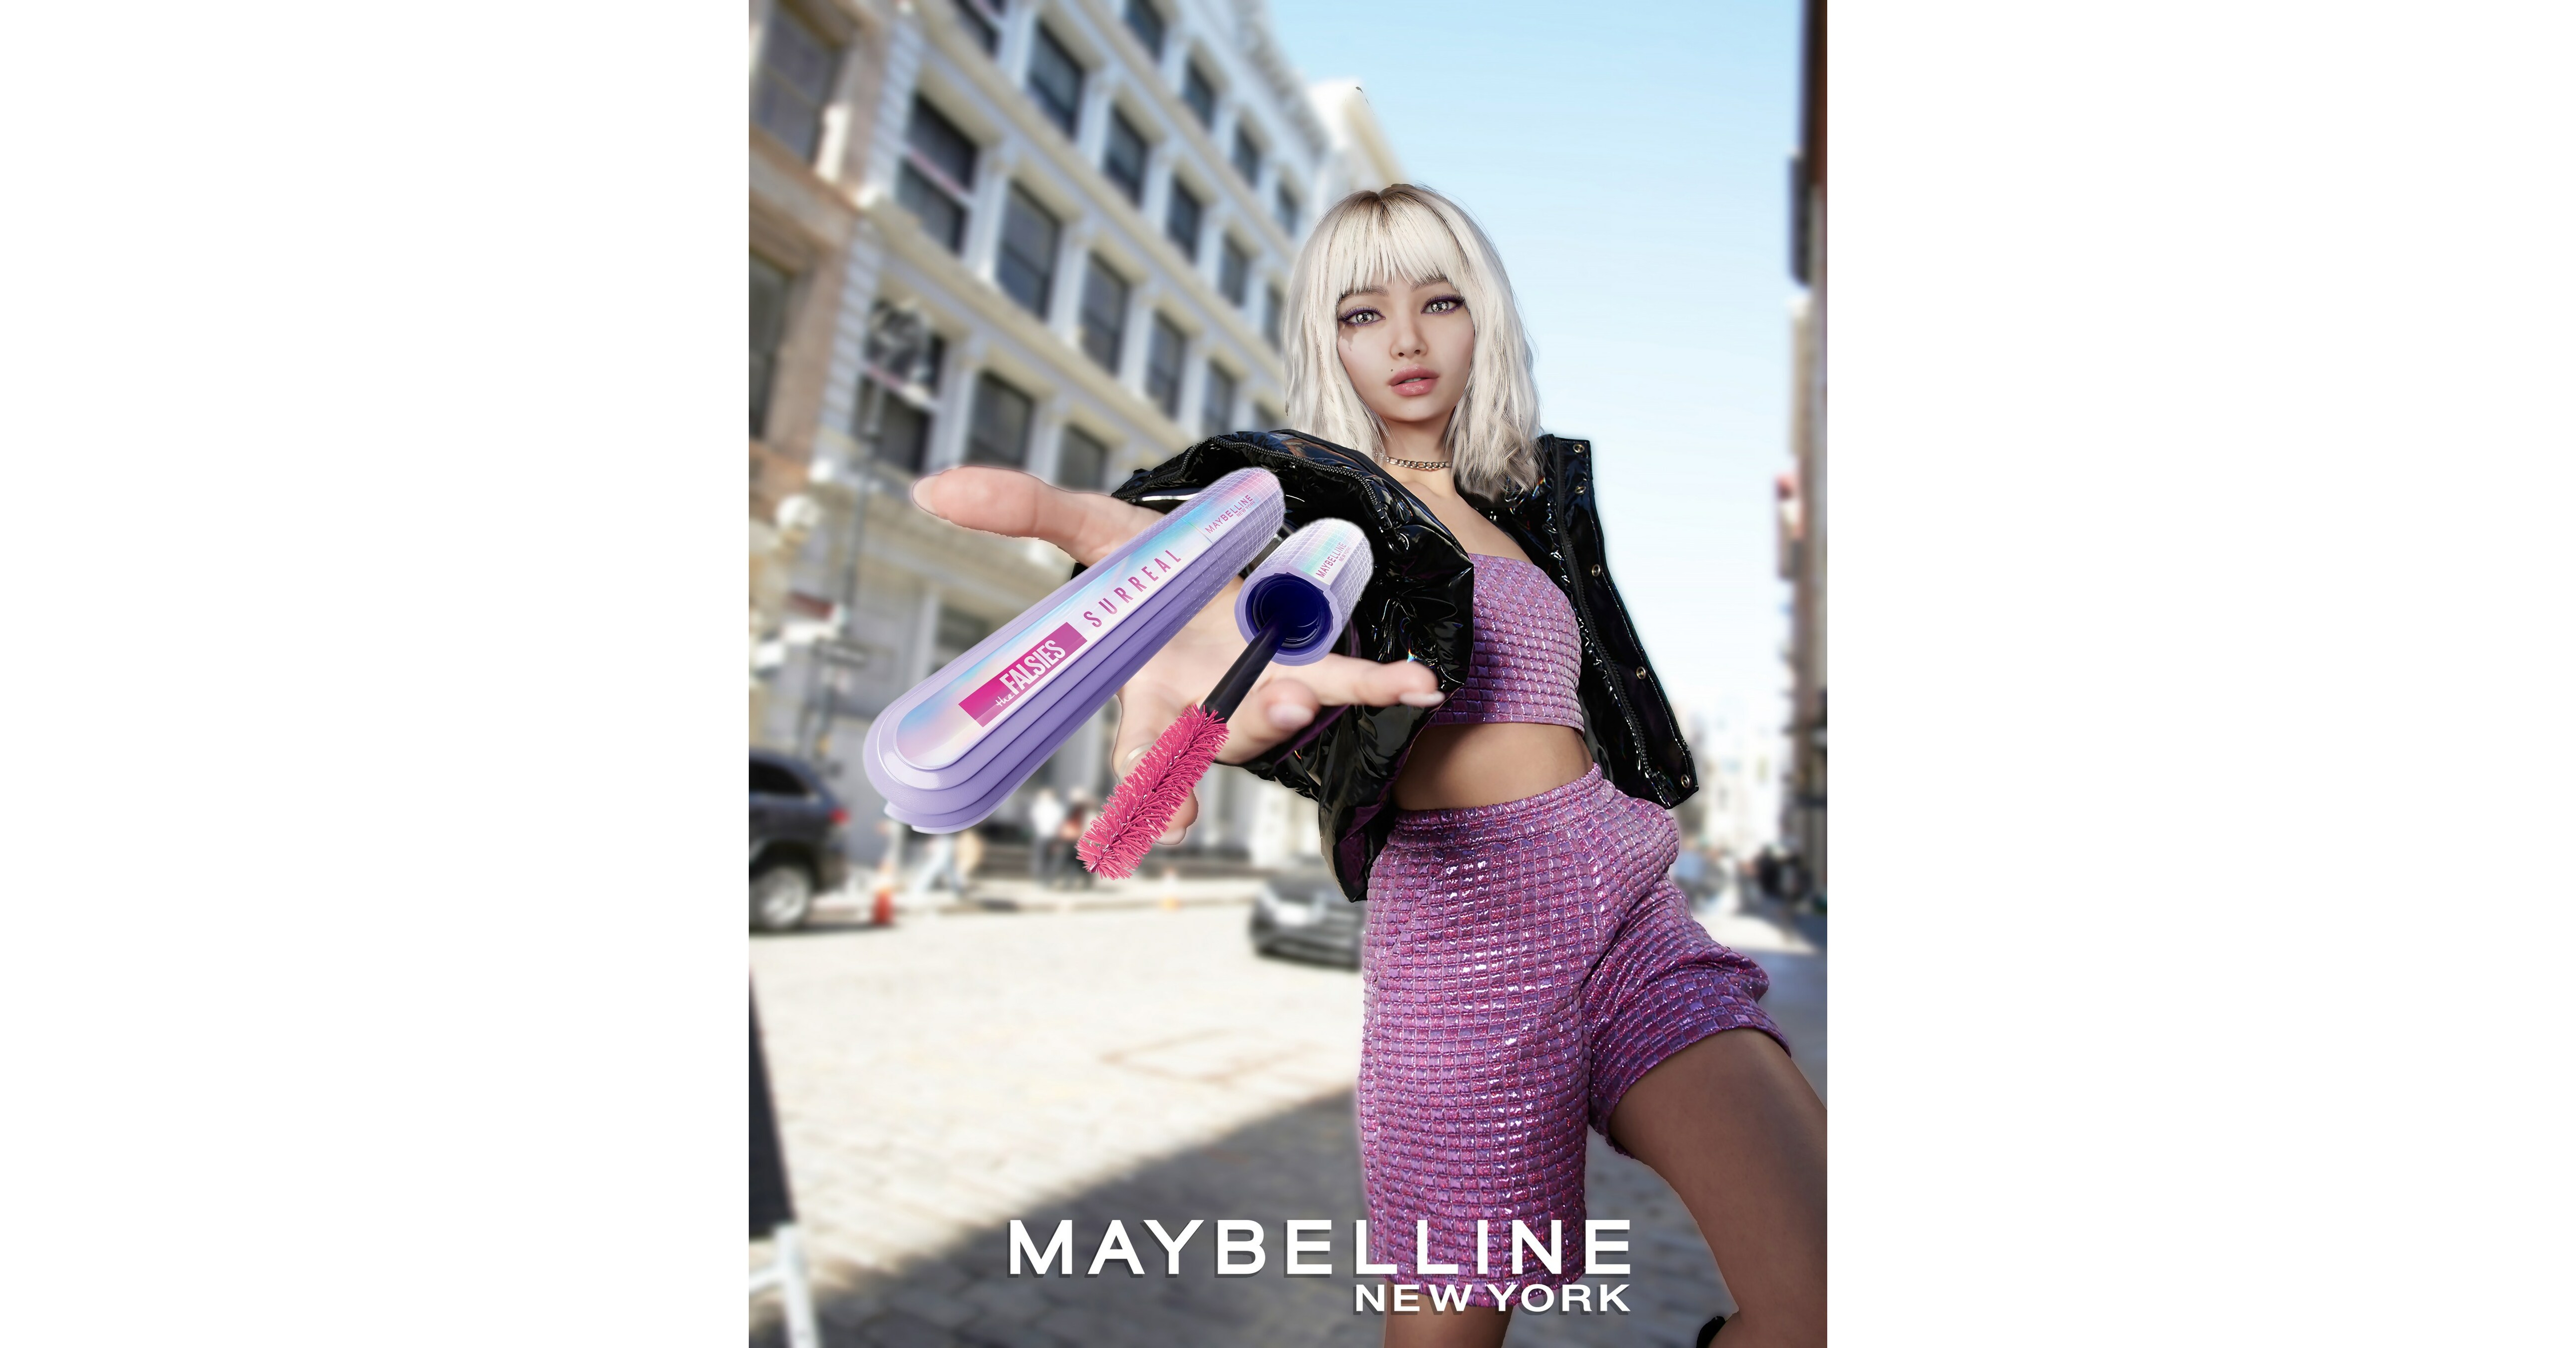 MAYBELLINE NEW YORK LAUNCHES THE EXTENSIONS FEATURING SURREAL FIRST-EVER ITS FALSIES MASCARA AVATAR